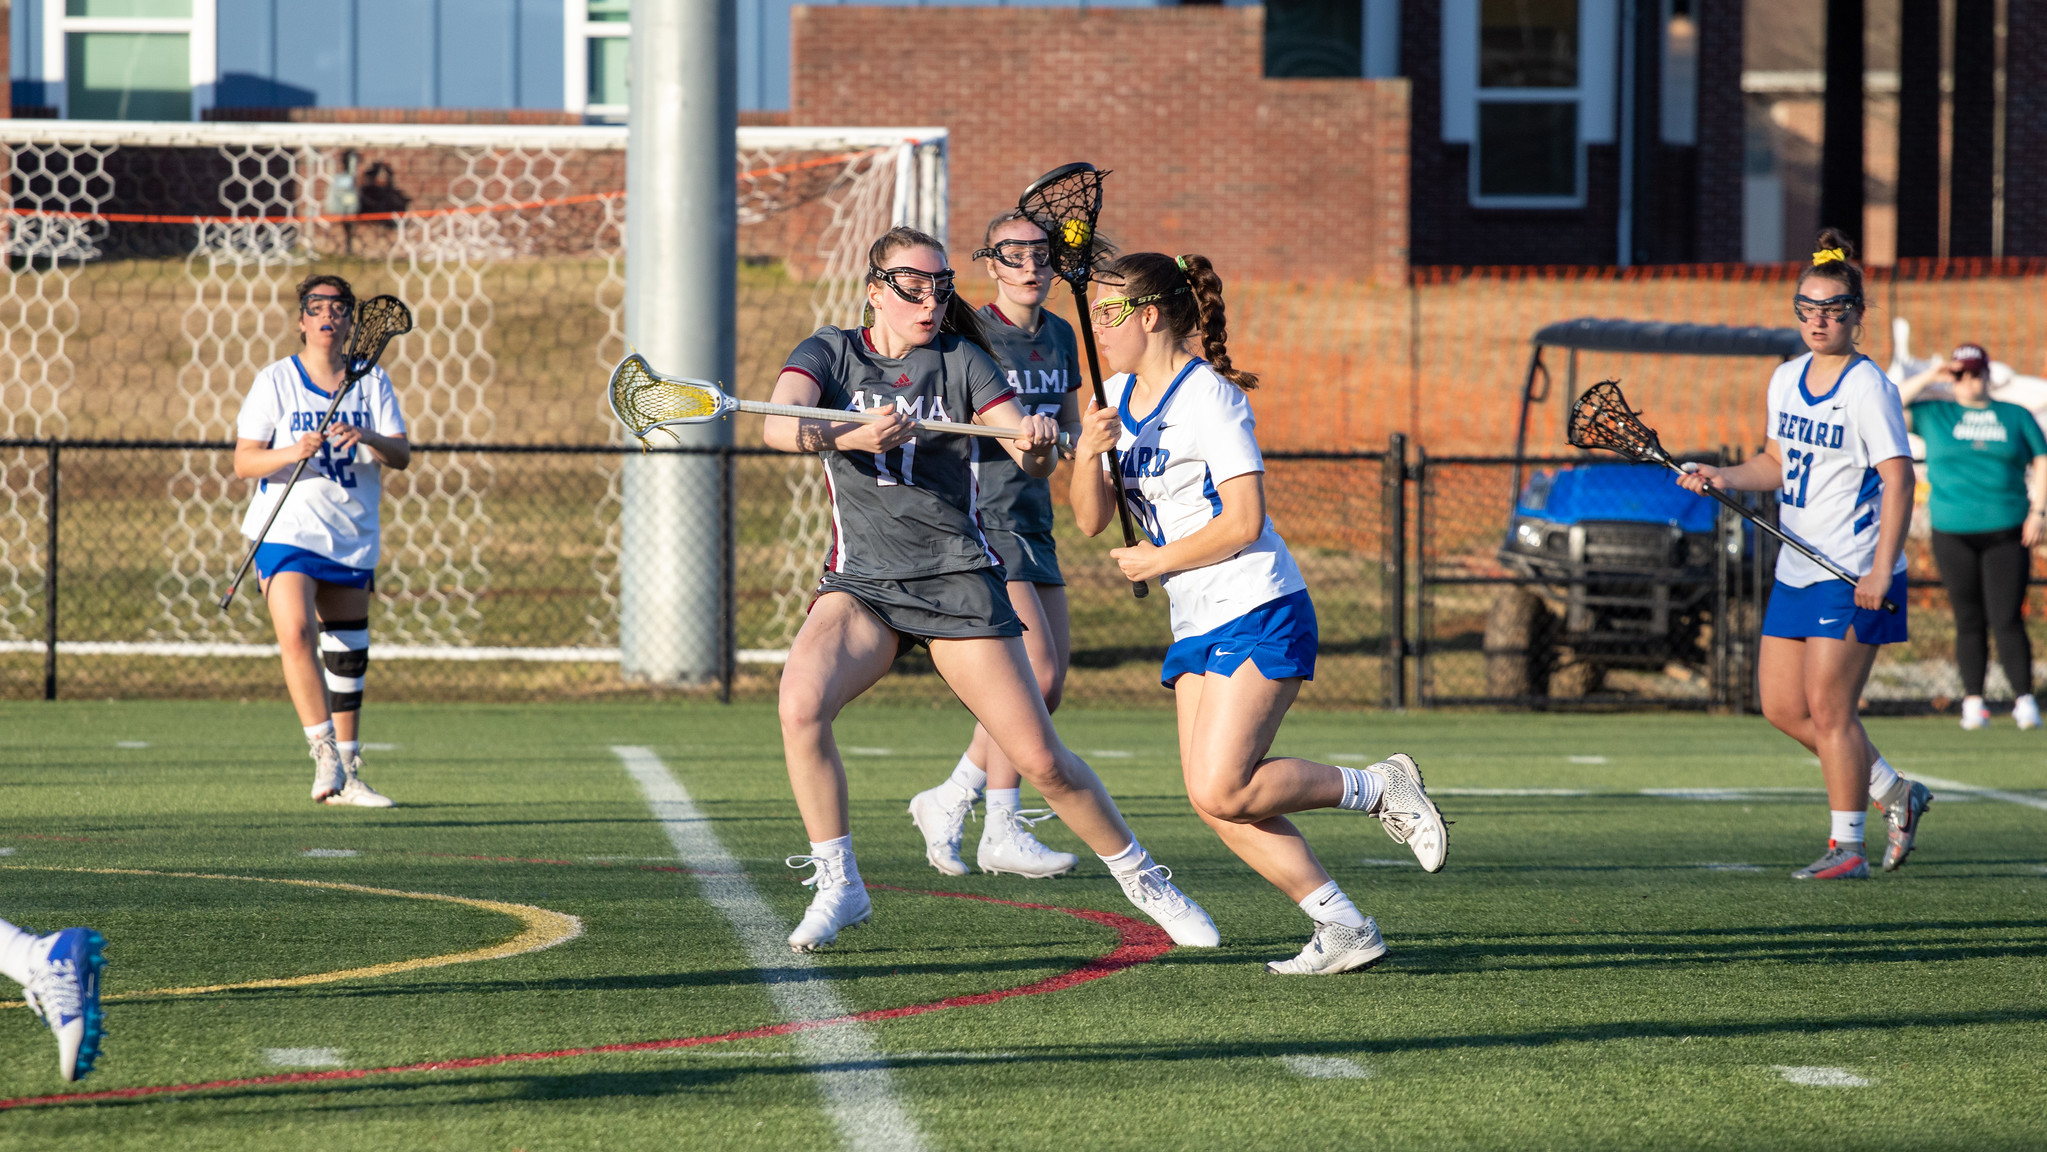 Parker Moore scored five goals, including the last three of the game and the eventual game-winner, as Brevard defeated NC Wesleyan in overtime 11-10 (Photo courtesy of Victoria Brayman '22)